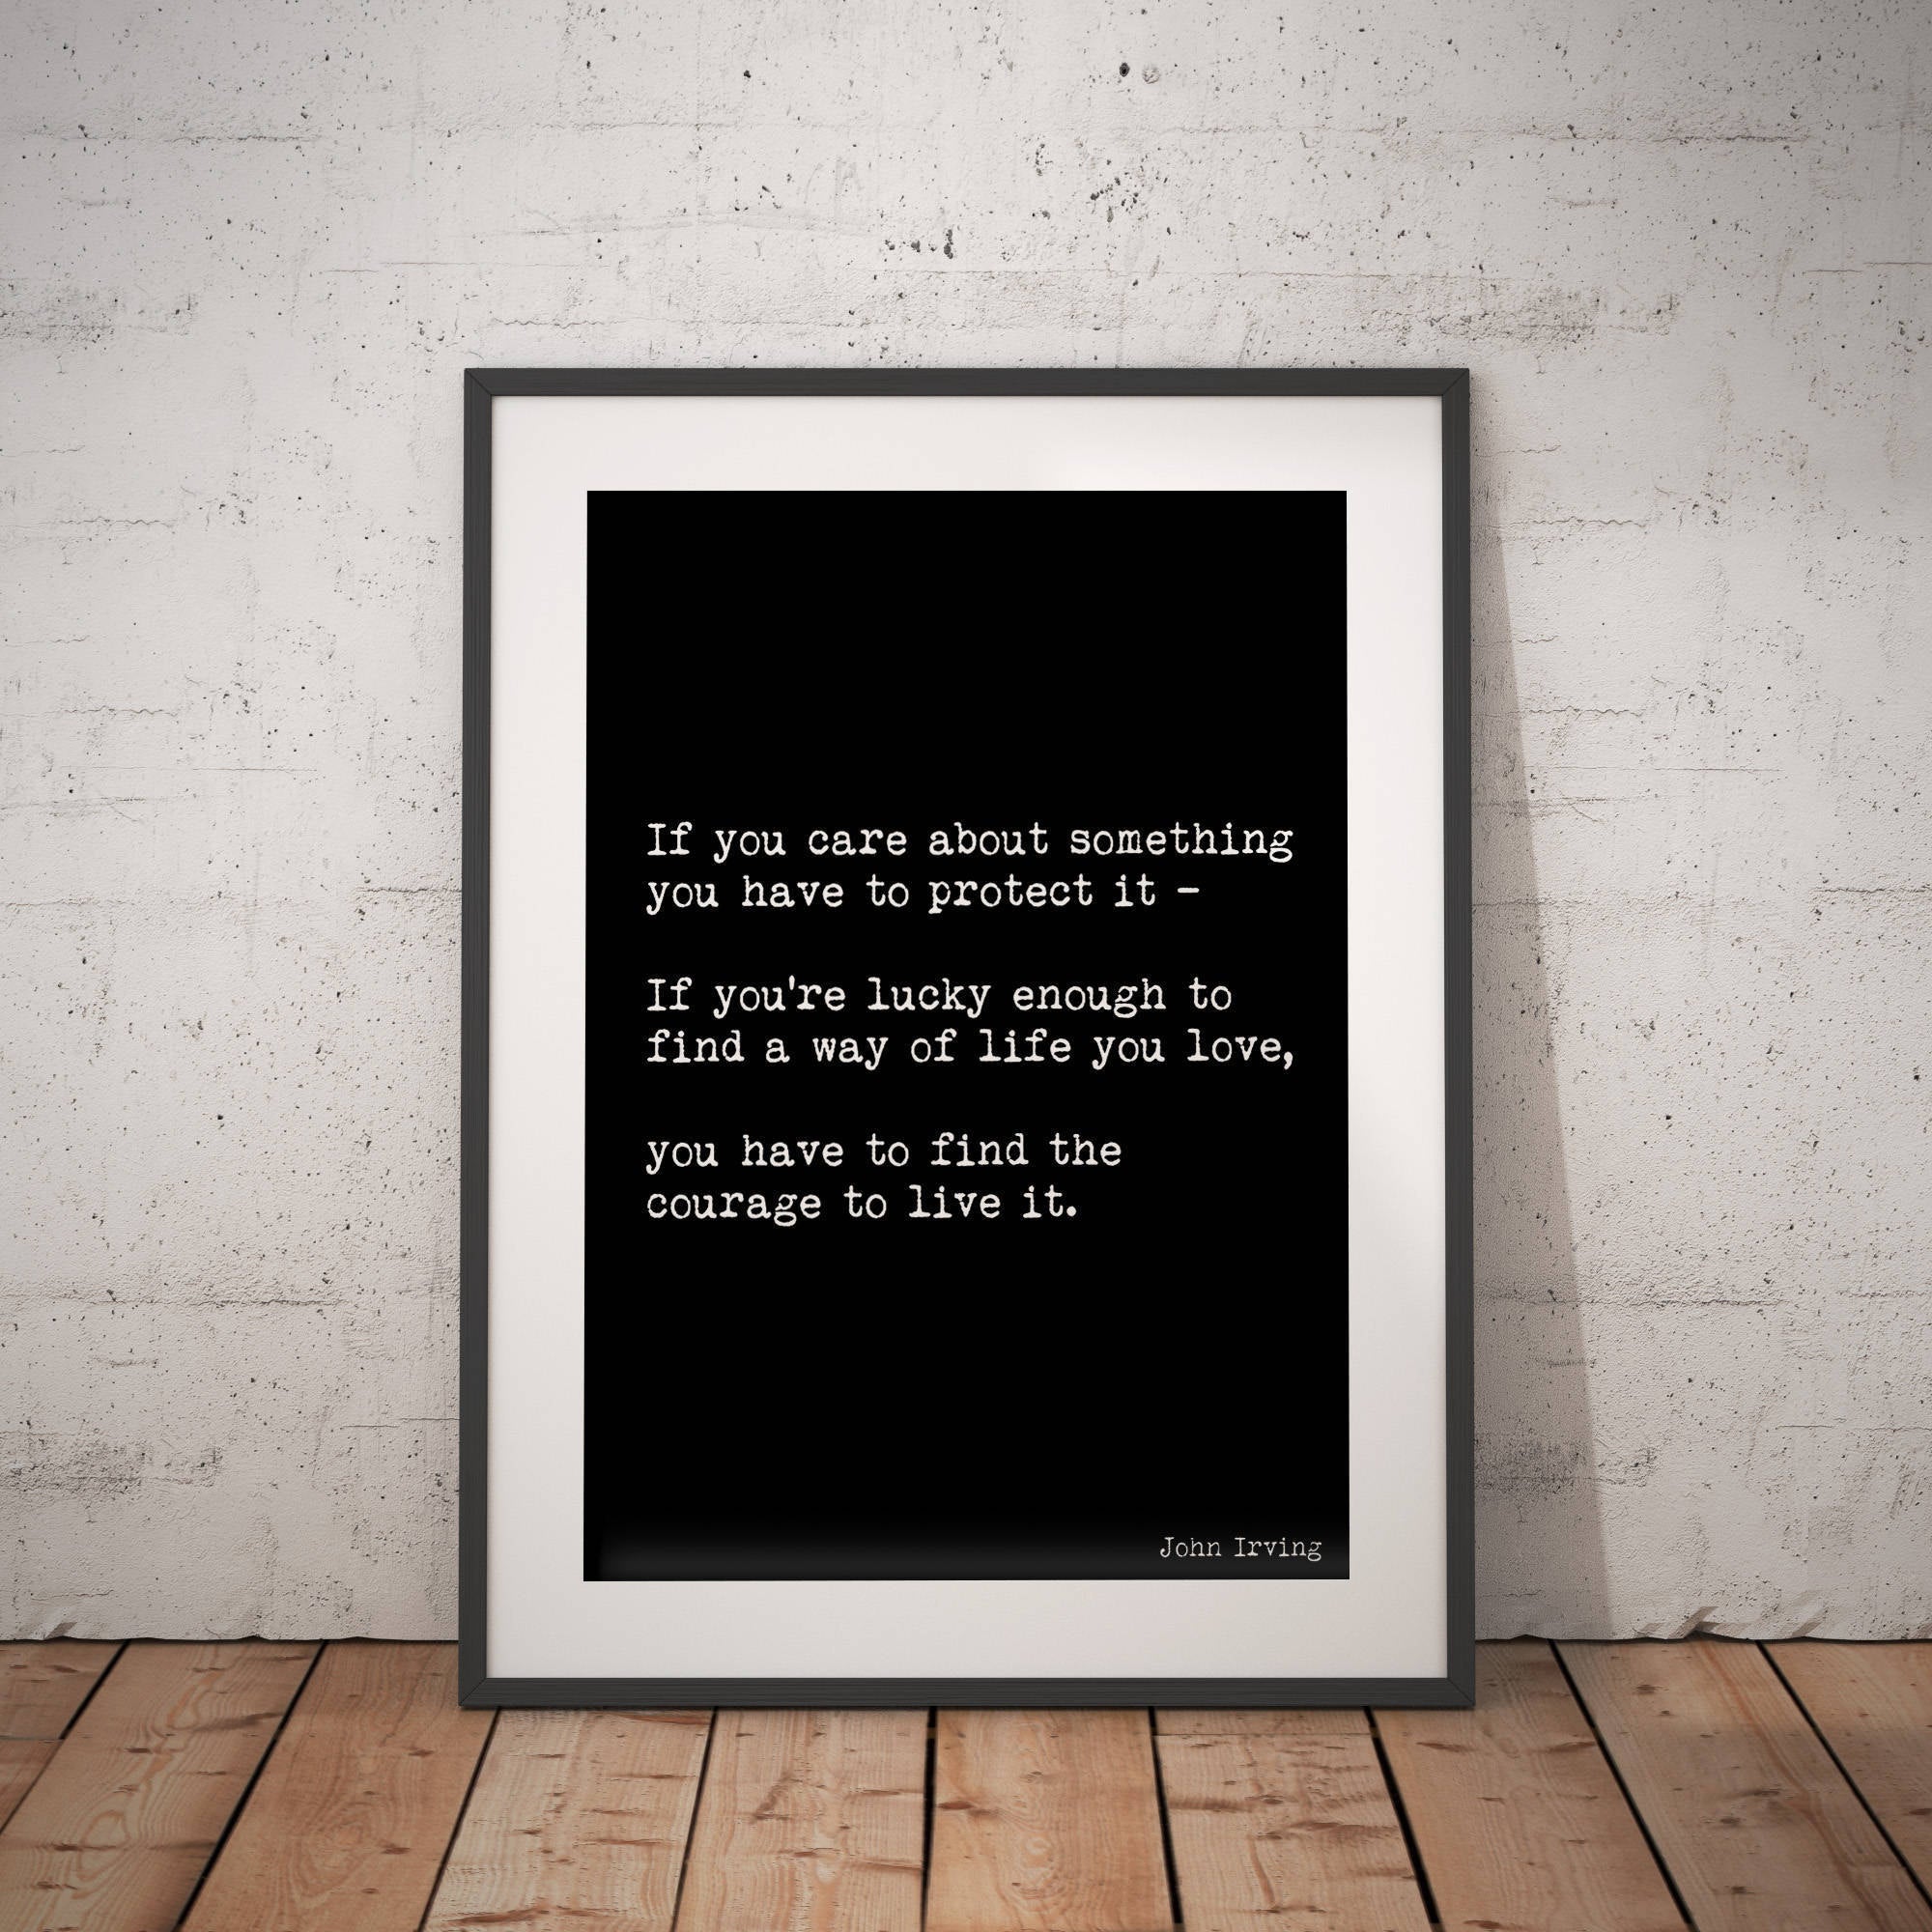 Way Of Life You Love Life Quote Motivational Print, Inspirational Quote Print Featuring A John Irving Quote In Black & White Unframed - BookQuoteDecor